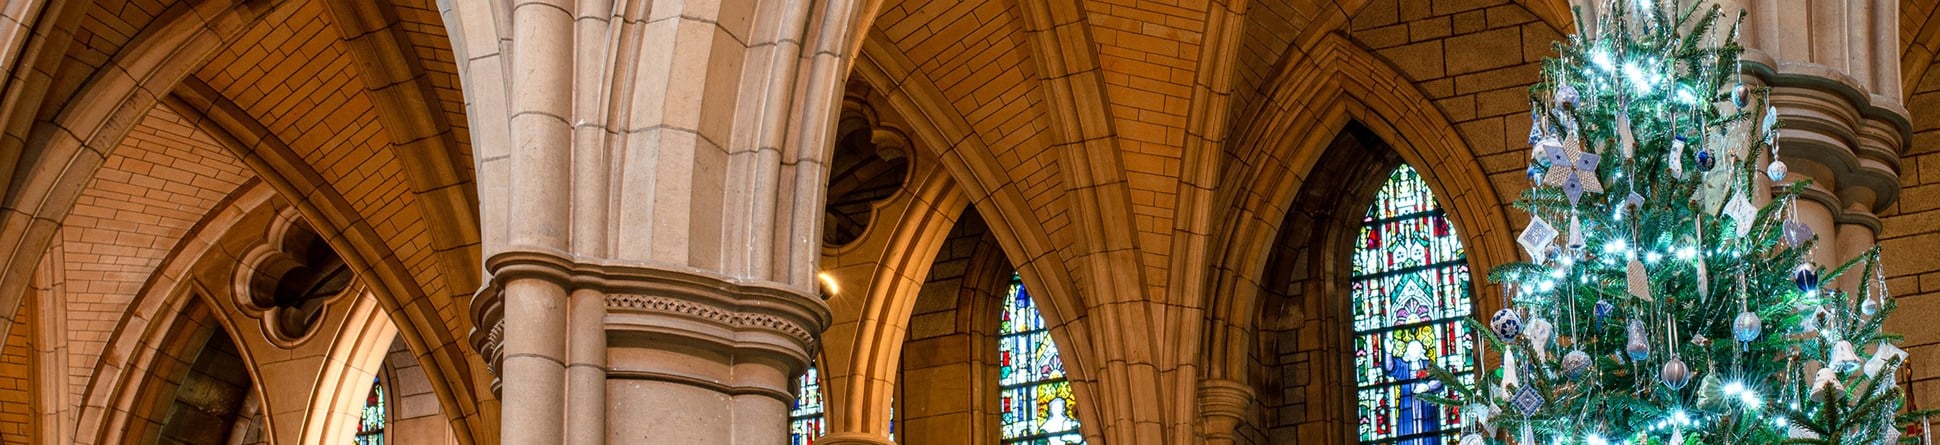 A photograph of the tops of some of Truro Cathedral's pointed arches, with stained glass windows in the background. In the foreground, to the right hand side, there is a Christmas tree.